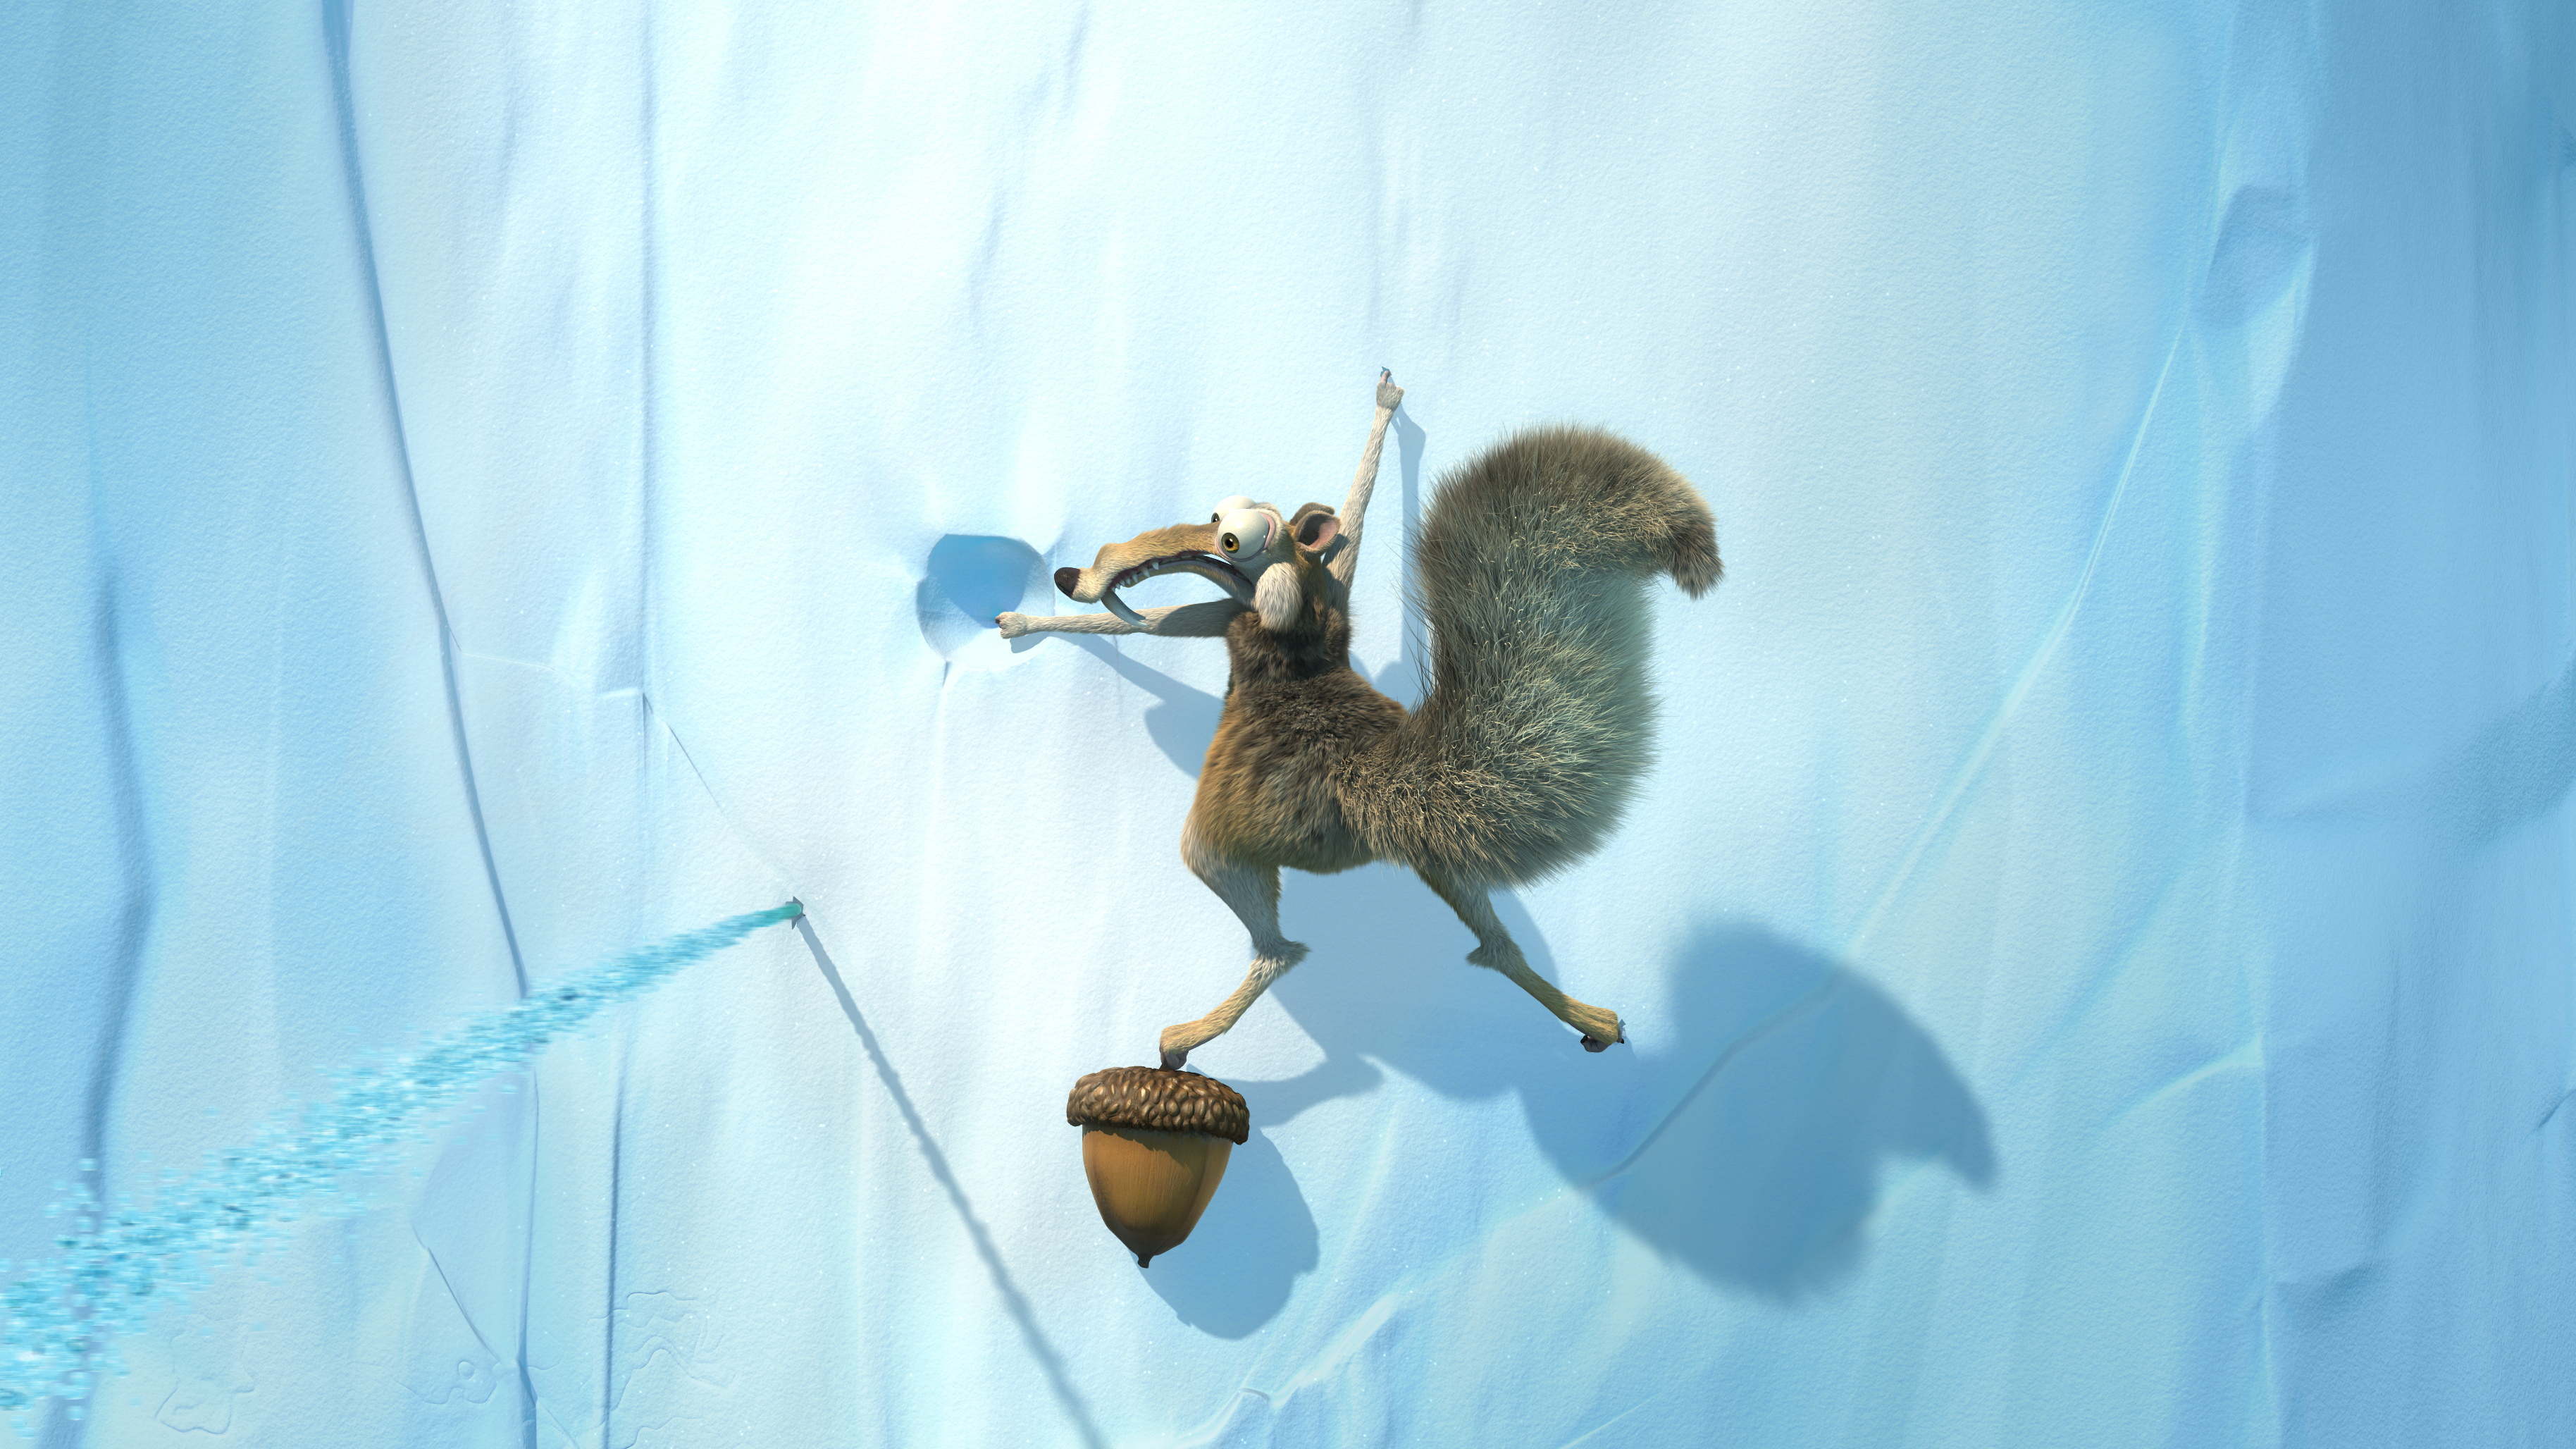 android ice age, video game